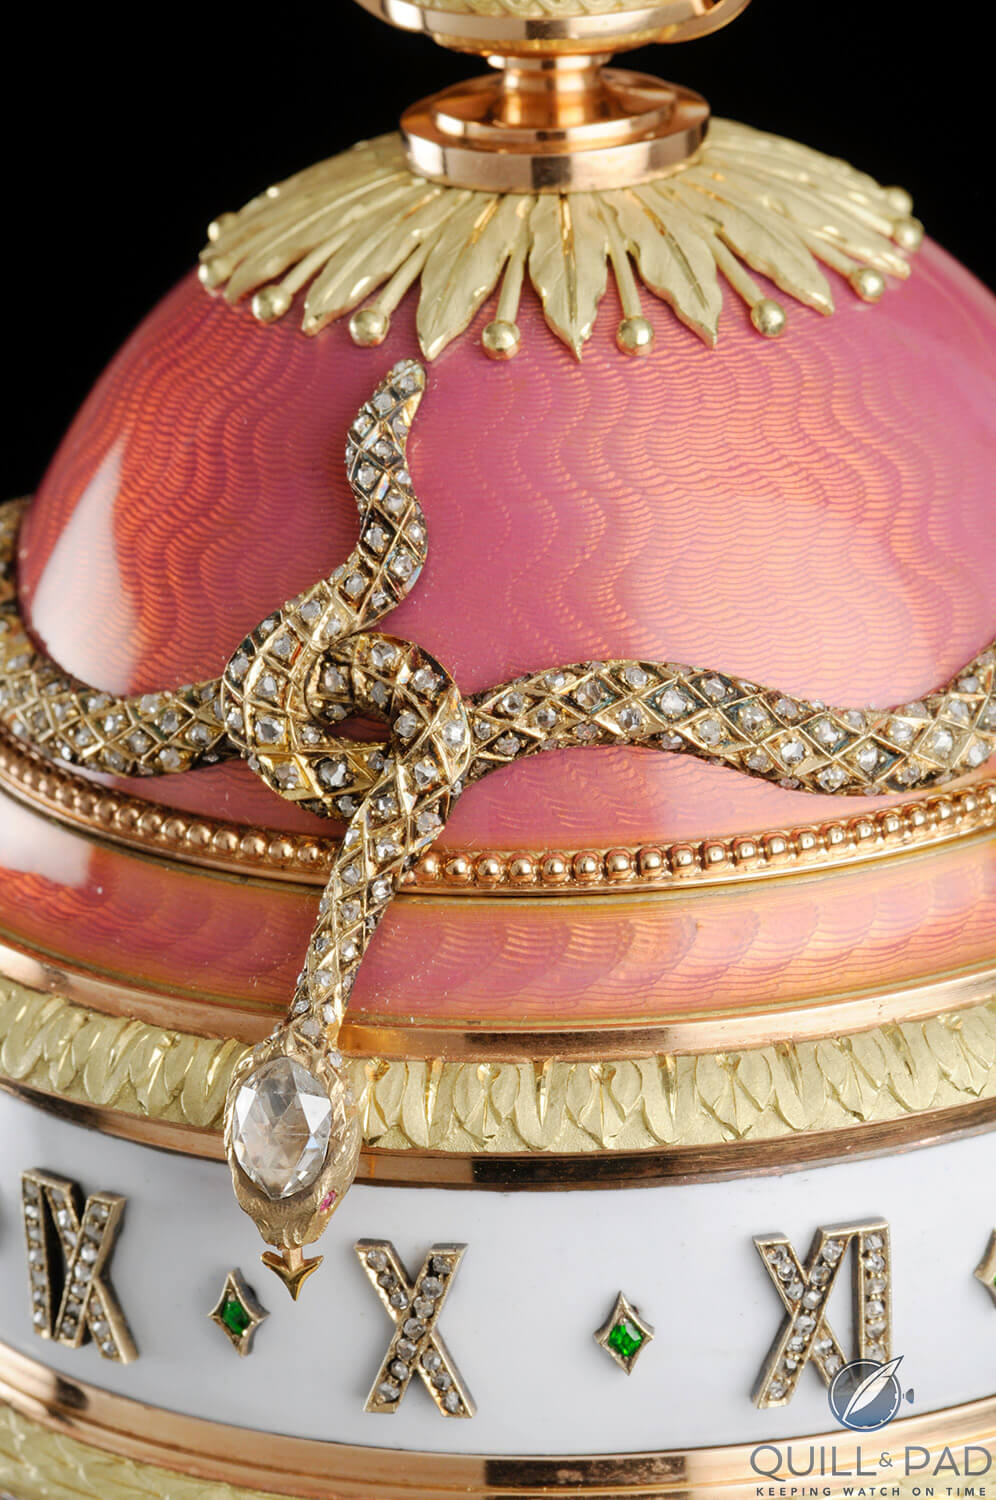 The diamond-set head of the serpent indicates the hours on the Yusupov Fabergé Egg